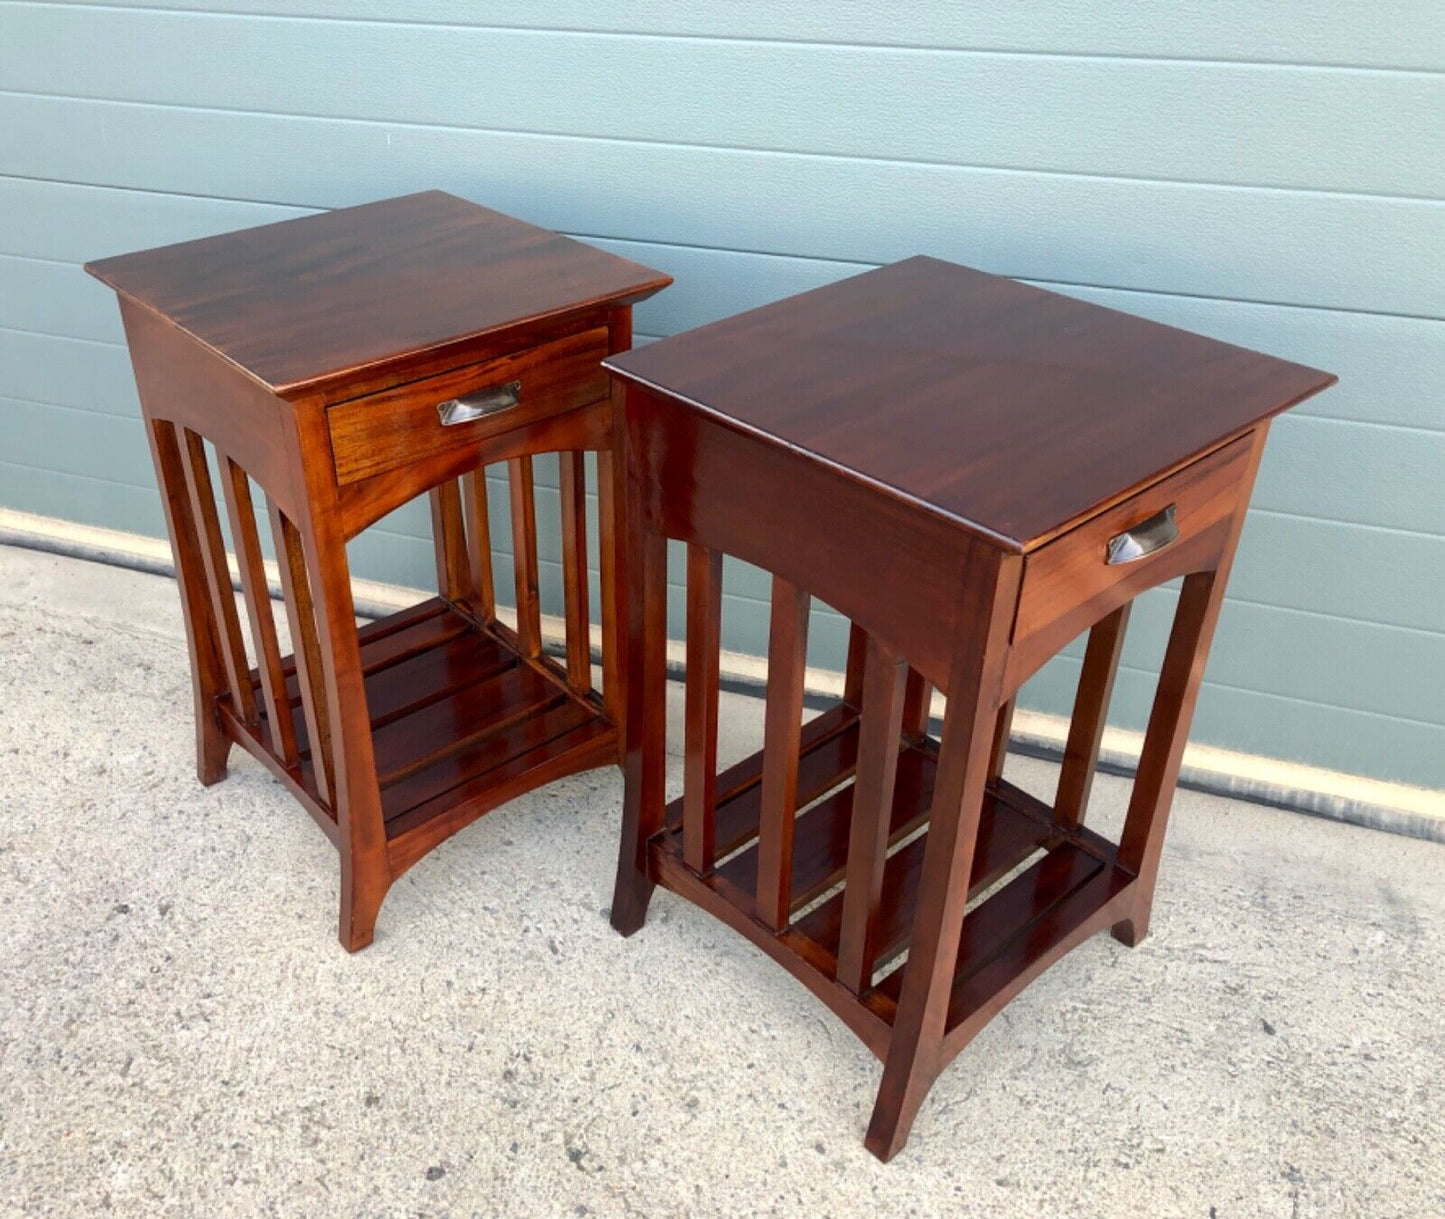 000802....Handsome Pair Of Vintage Mahogany Bedside Tables / Lamp Tables ( sold )